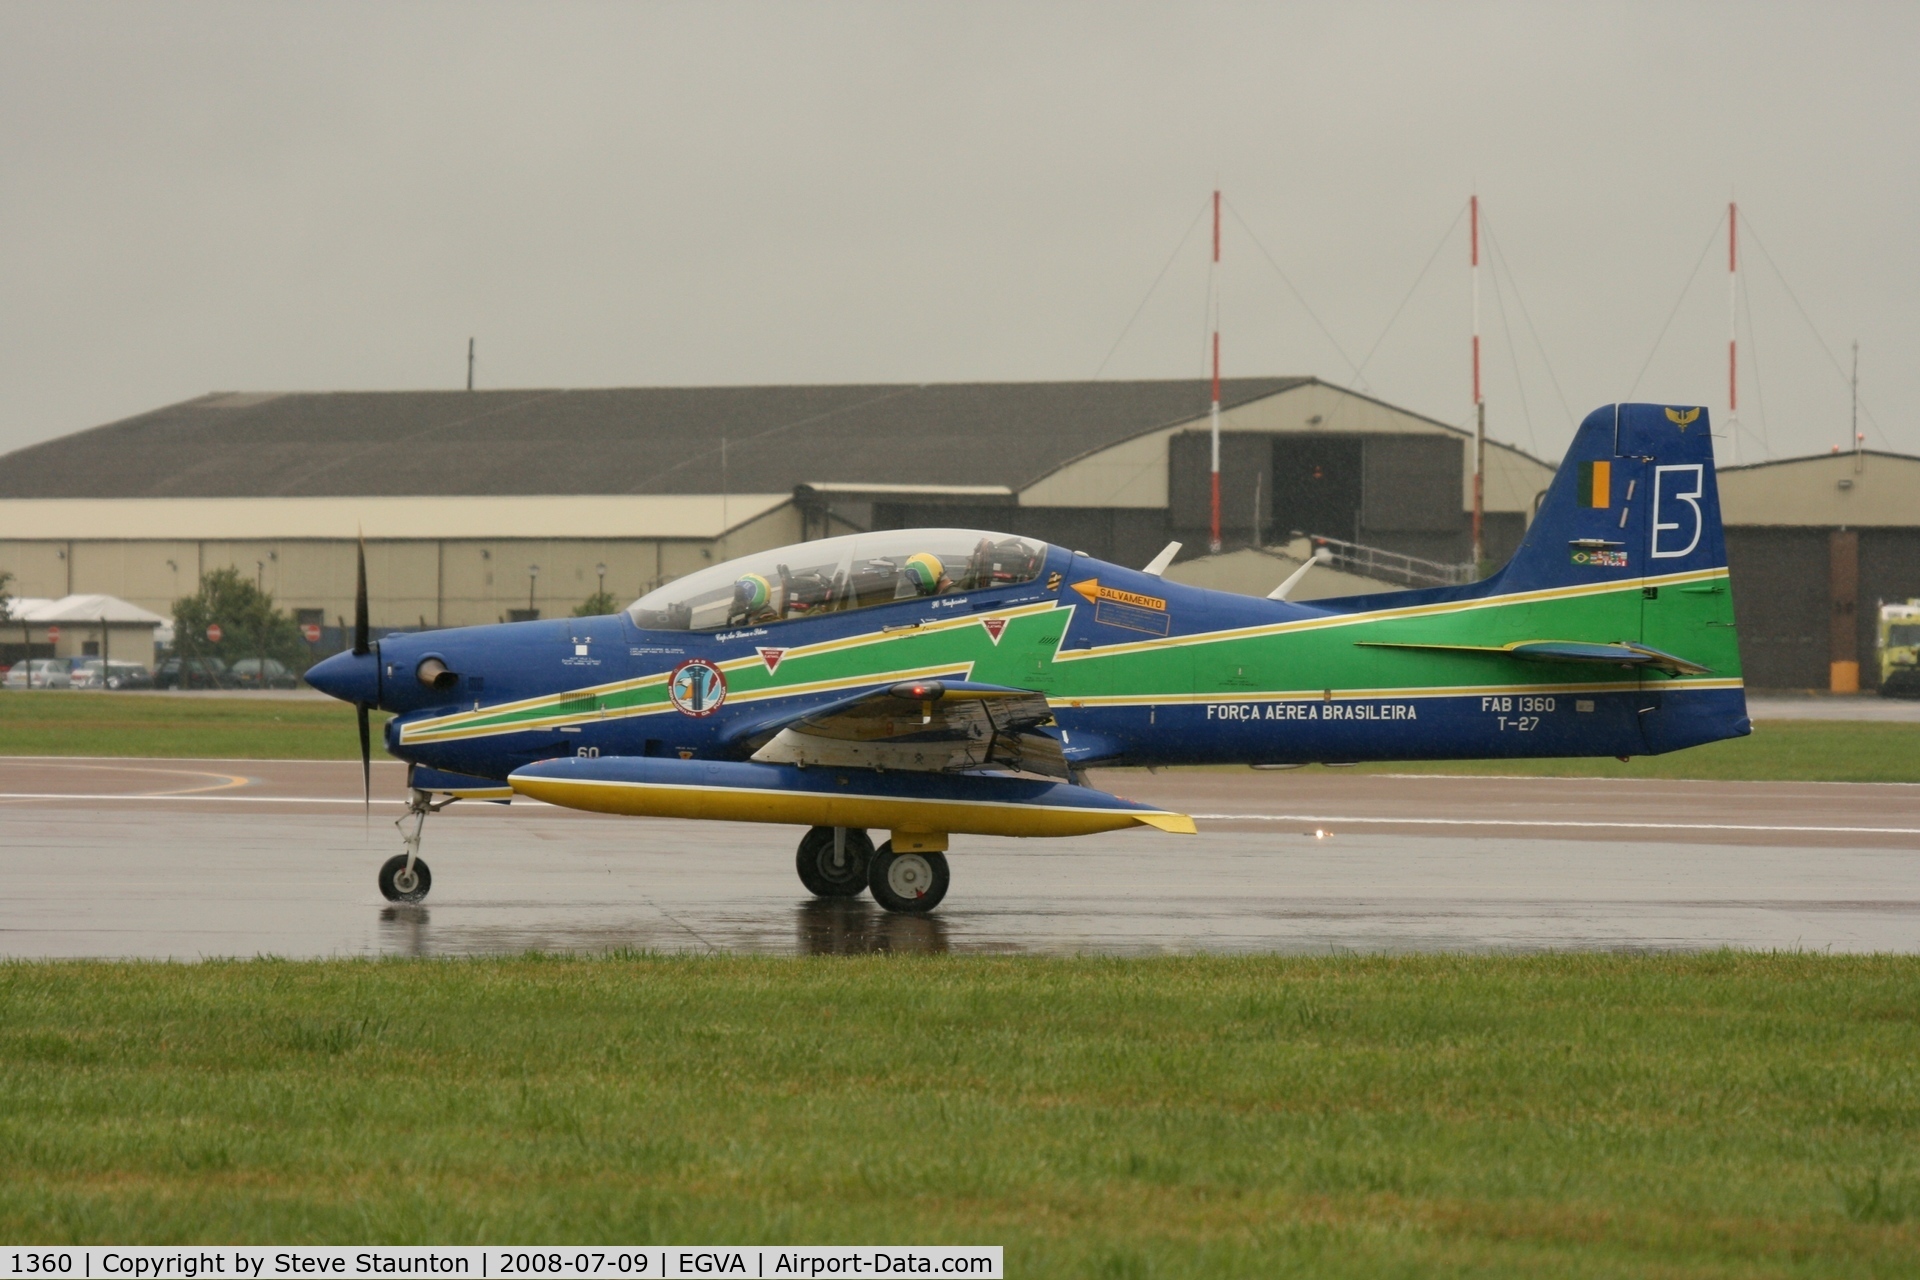 1360, Embraer T-27 Tucano (EMB-312) C/N 312074, Taken at the Royal International Air Tattoo 2008 during arrivals and departures (show days cancelled due to bad weather)